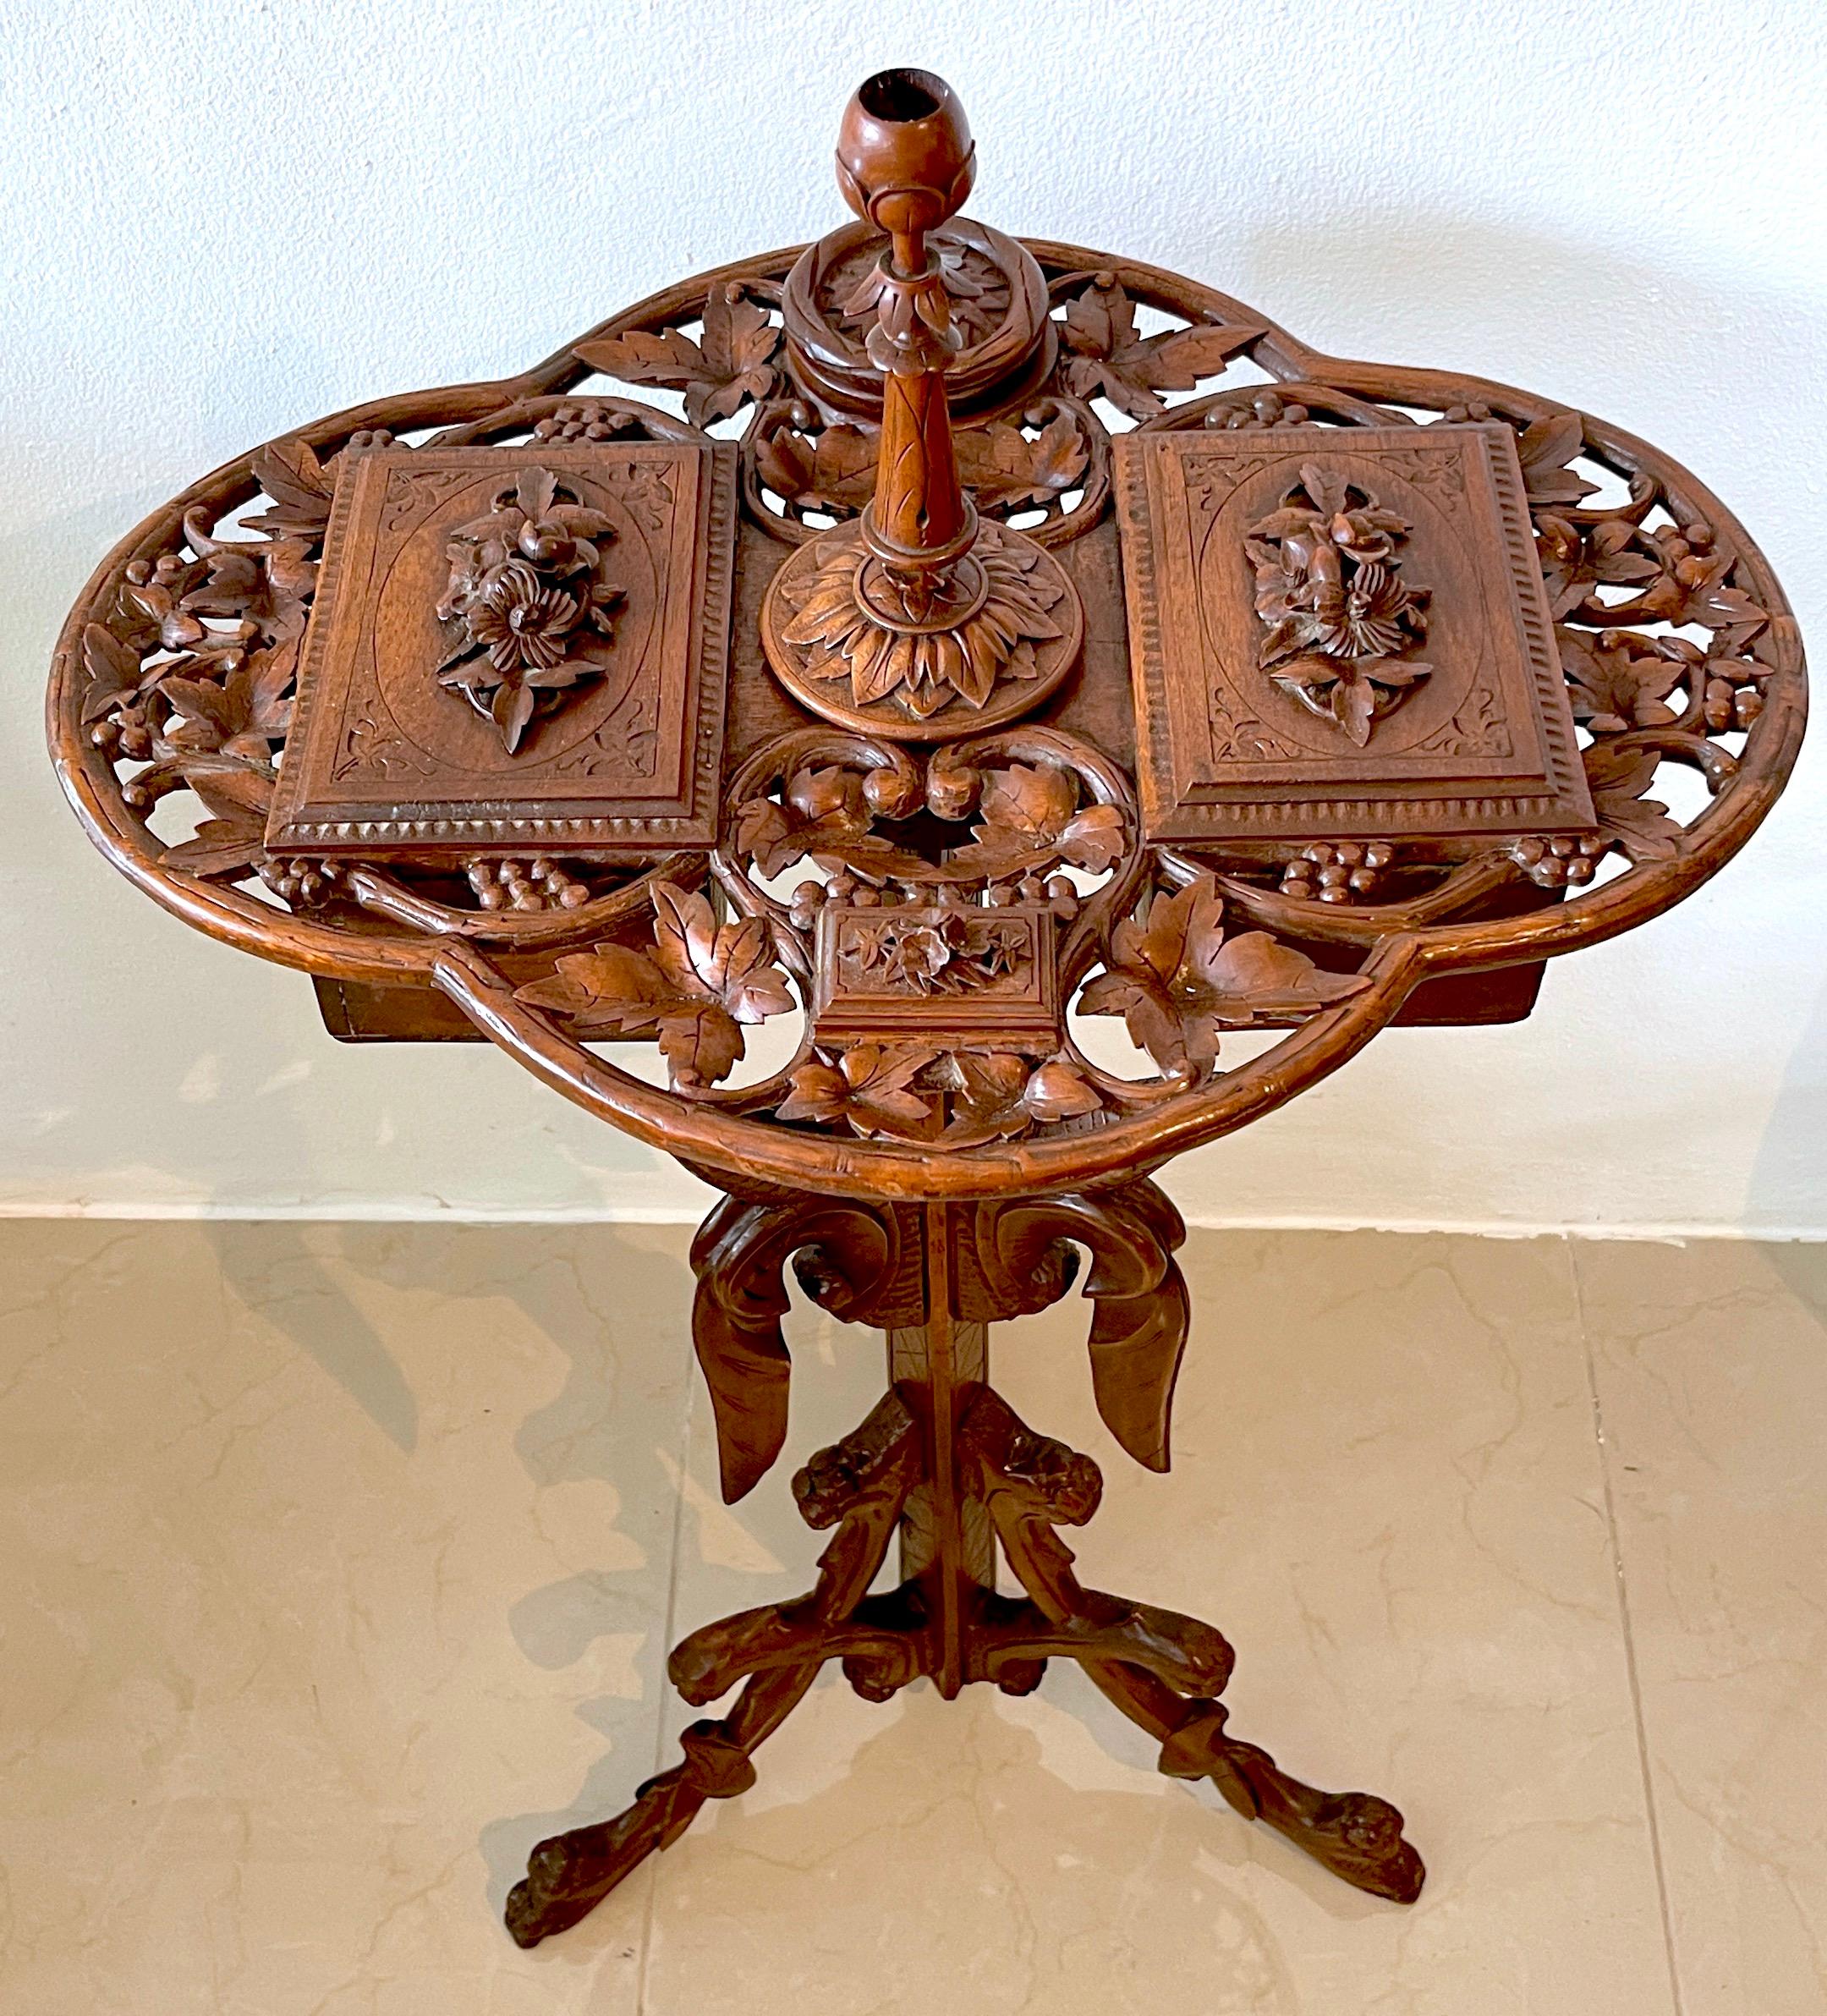 19th century Swiss black Forrest carved walnut smoking stand- complete
Switzerland, Circa 1880s
An amazing example, with all its orignal pieces. The oval intricately hand-carved and pierced walnut trellis top, with all over floral and leaf motifs.